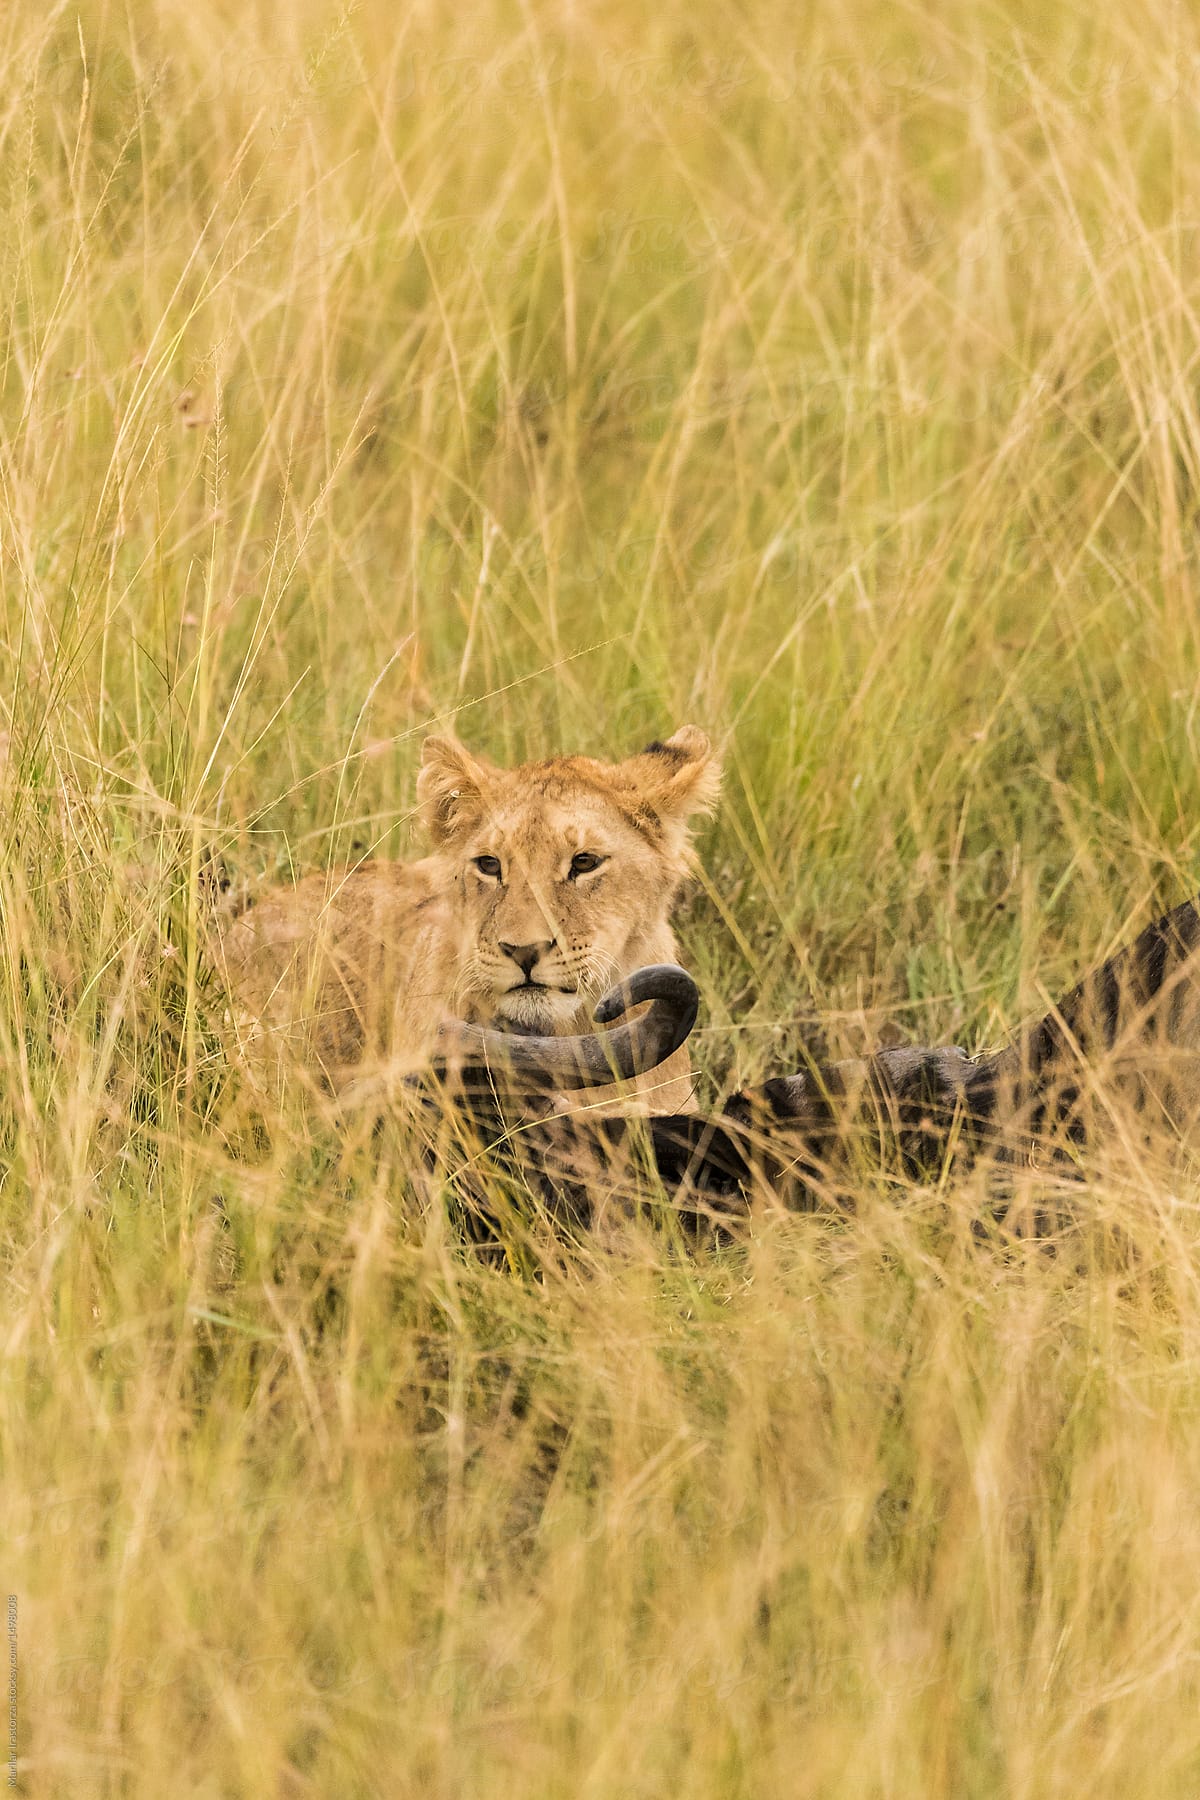 Little lion next to its prey in a golden field